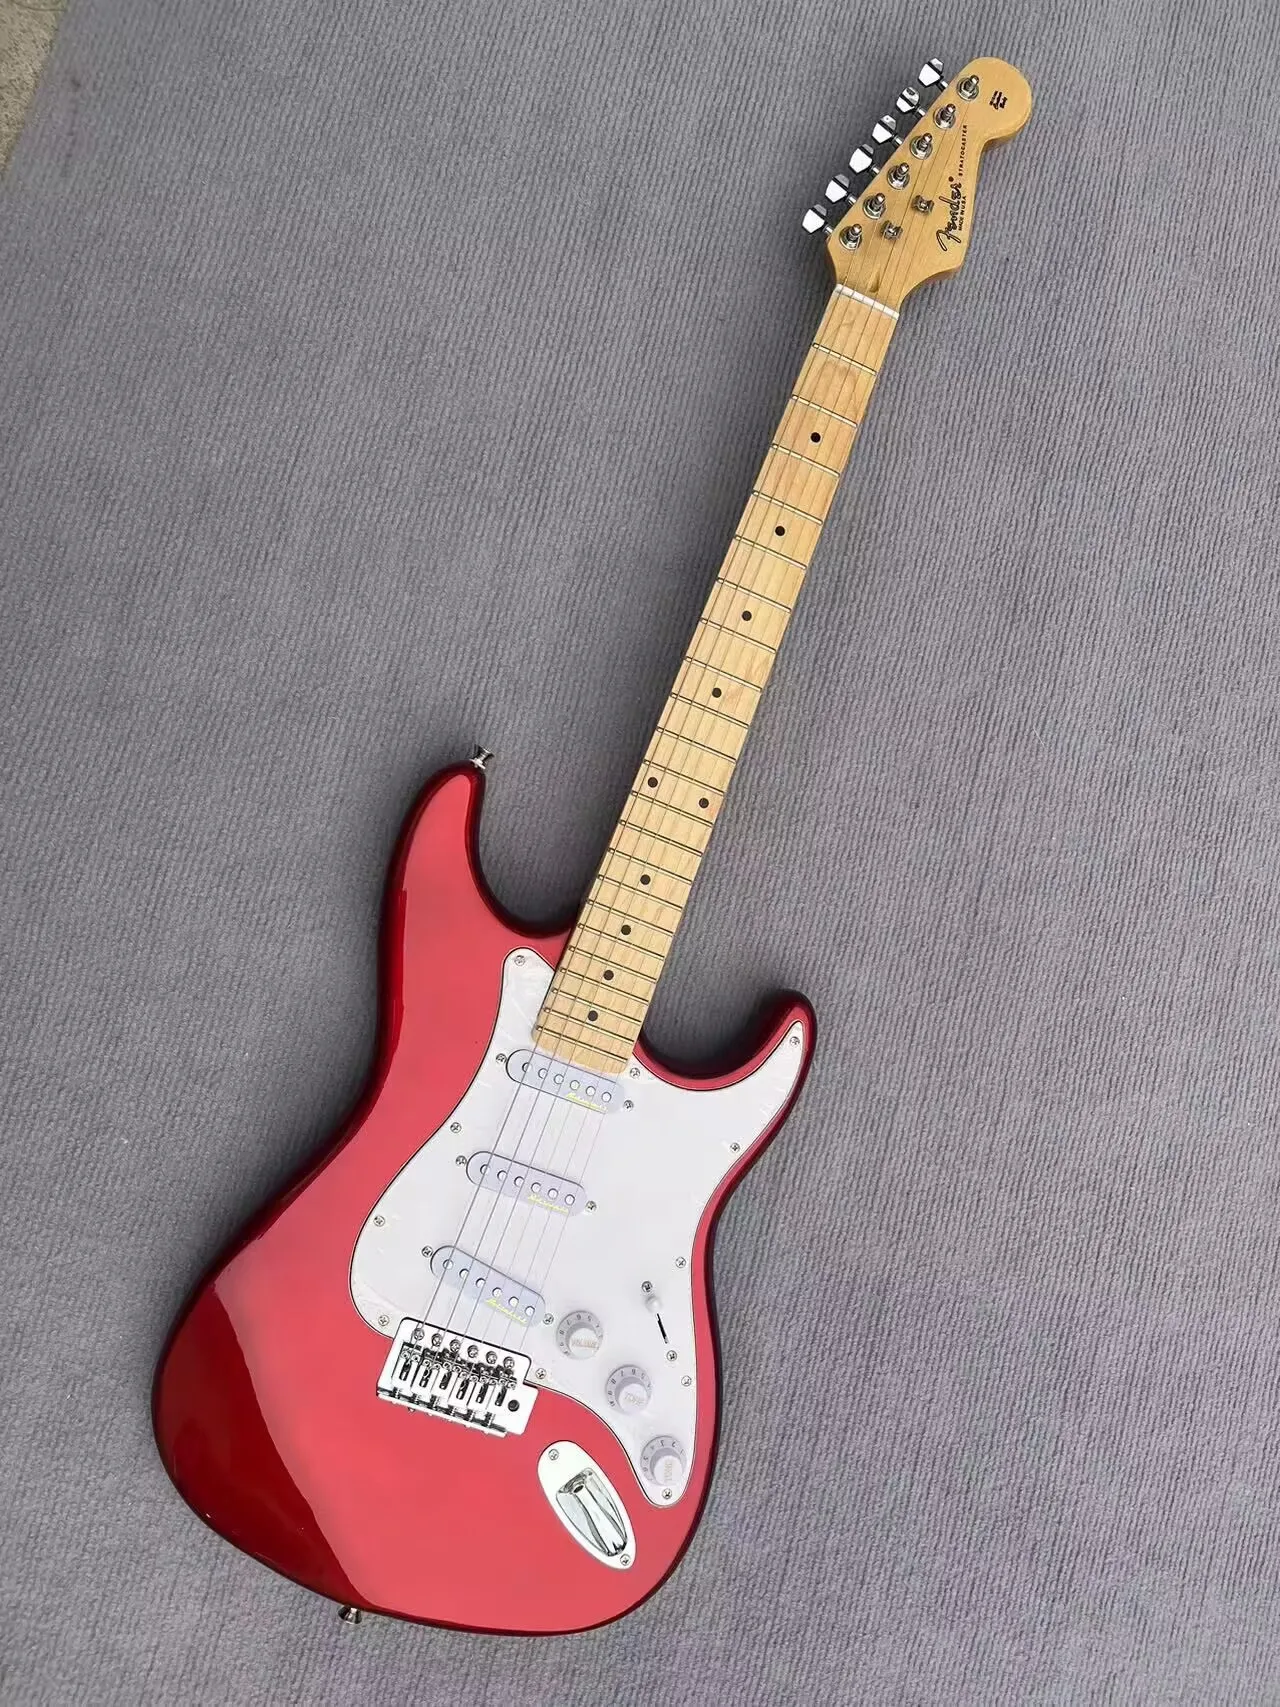 

Send in 3 days stratocaste-r custom body 6 string Red Electric Guitar in stock BHAOI